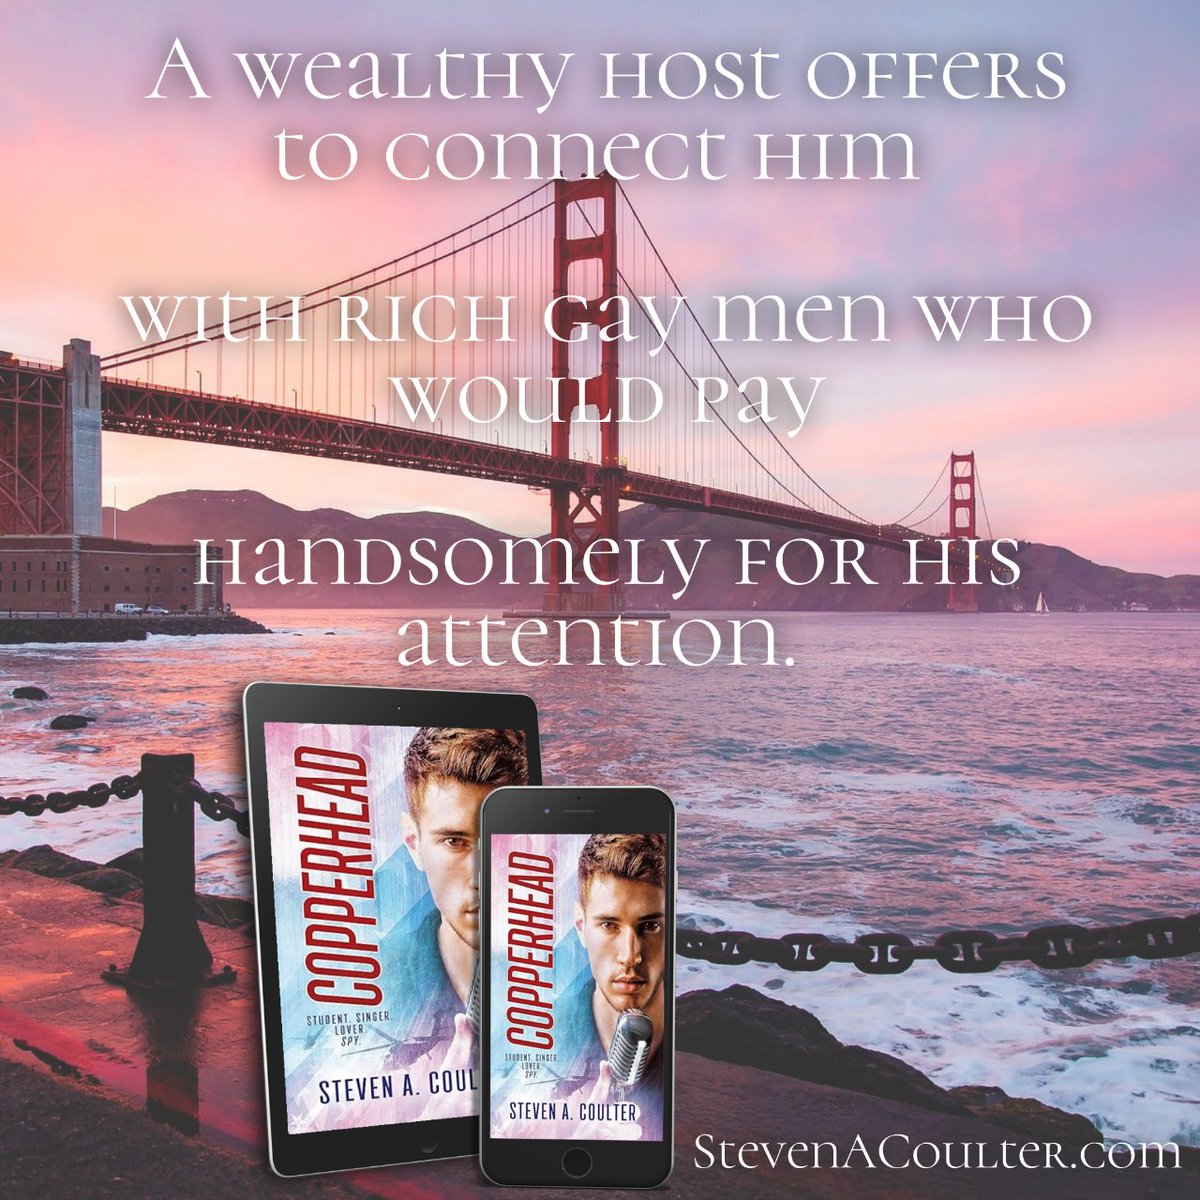 🎓 College freshman by day, 🎤 sensational singer by night, 🌈 lover caught in a web of intrigue—Abel faces an unimaginable choice when he's drawn into California's political and social elite.
🎤amazon.com/Copperhead-Ste…

#StudentSingerLoverSpy #Thriller #Romance #SpyNovel